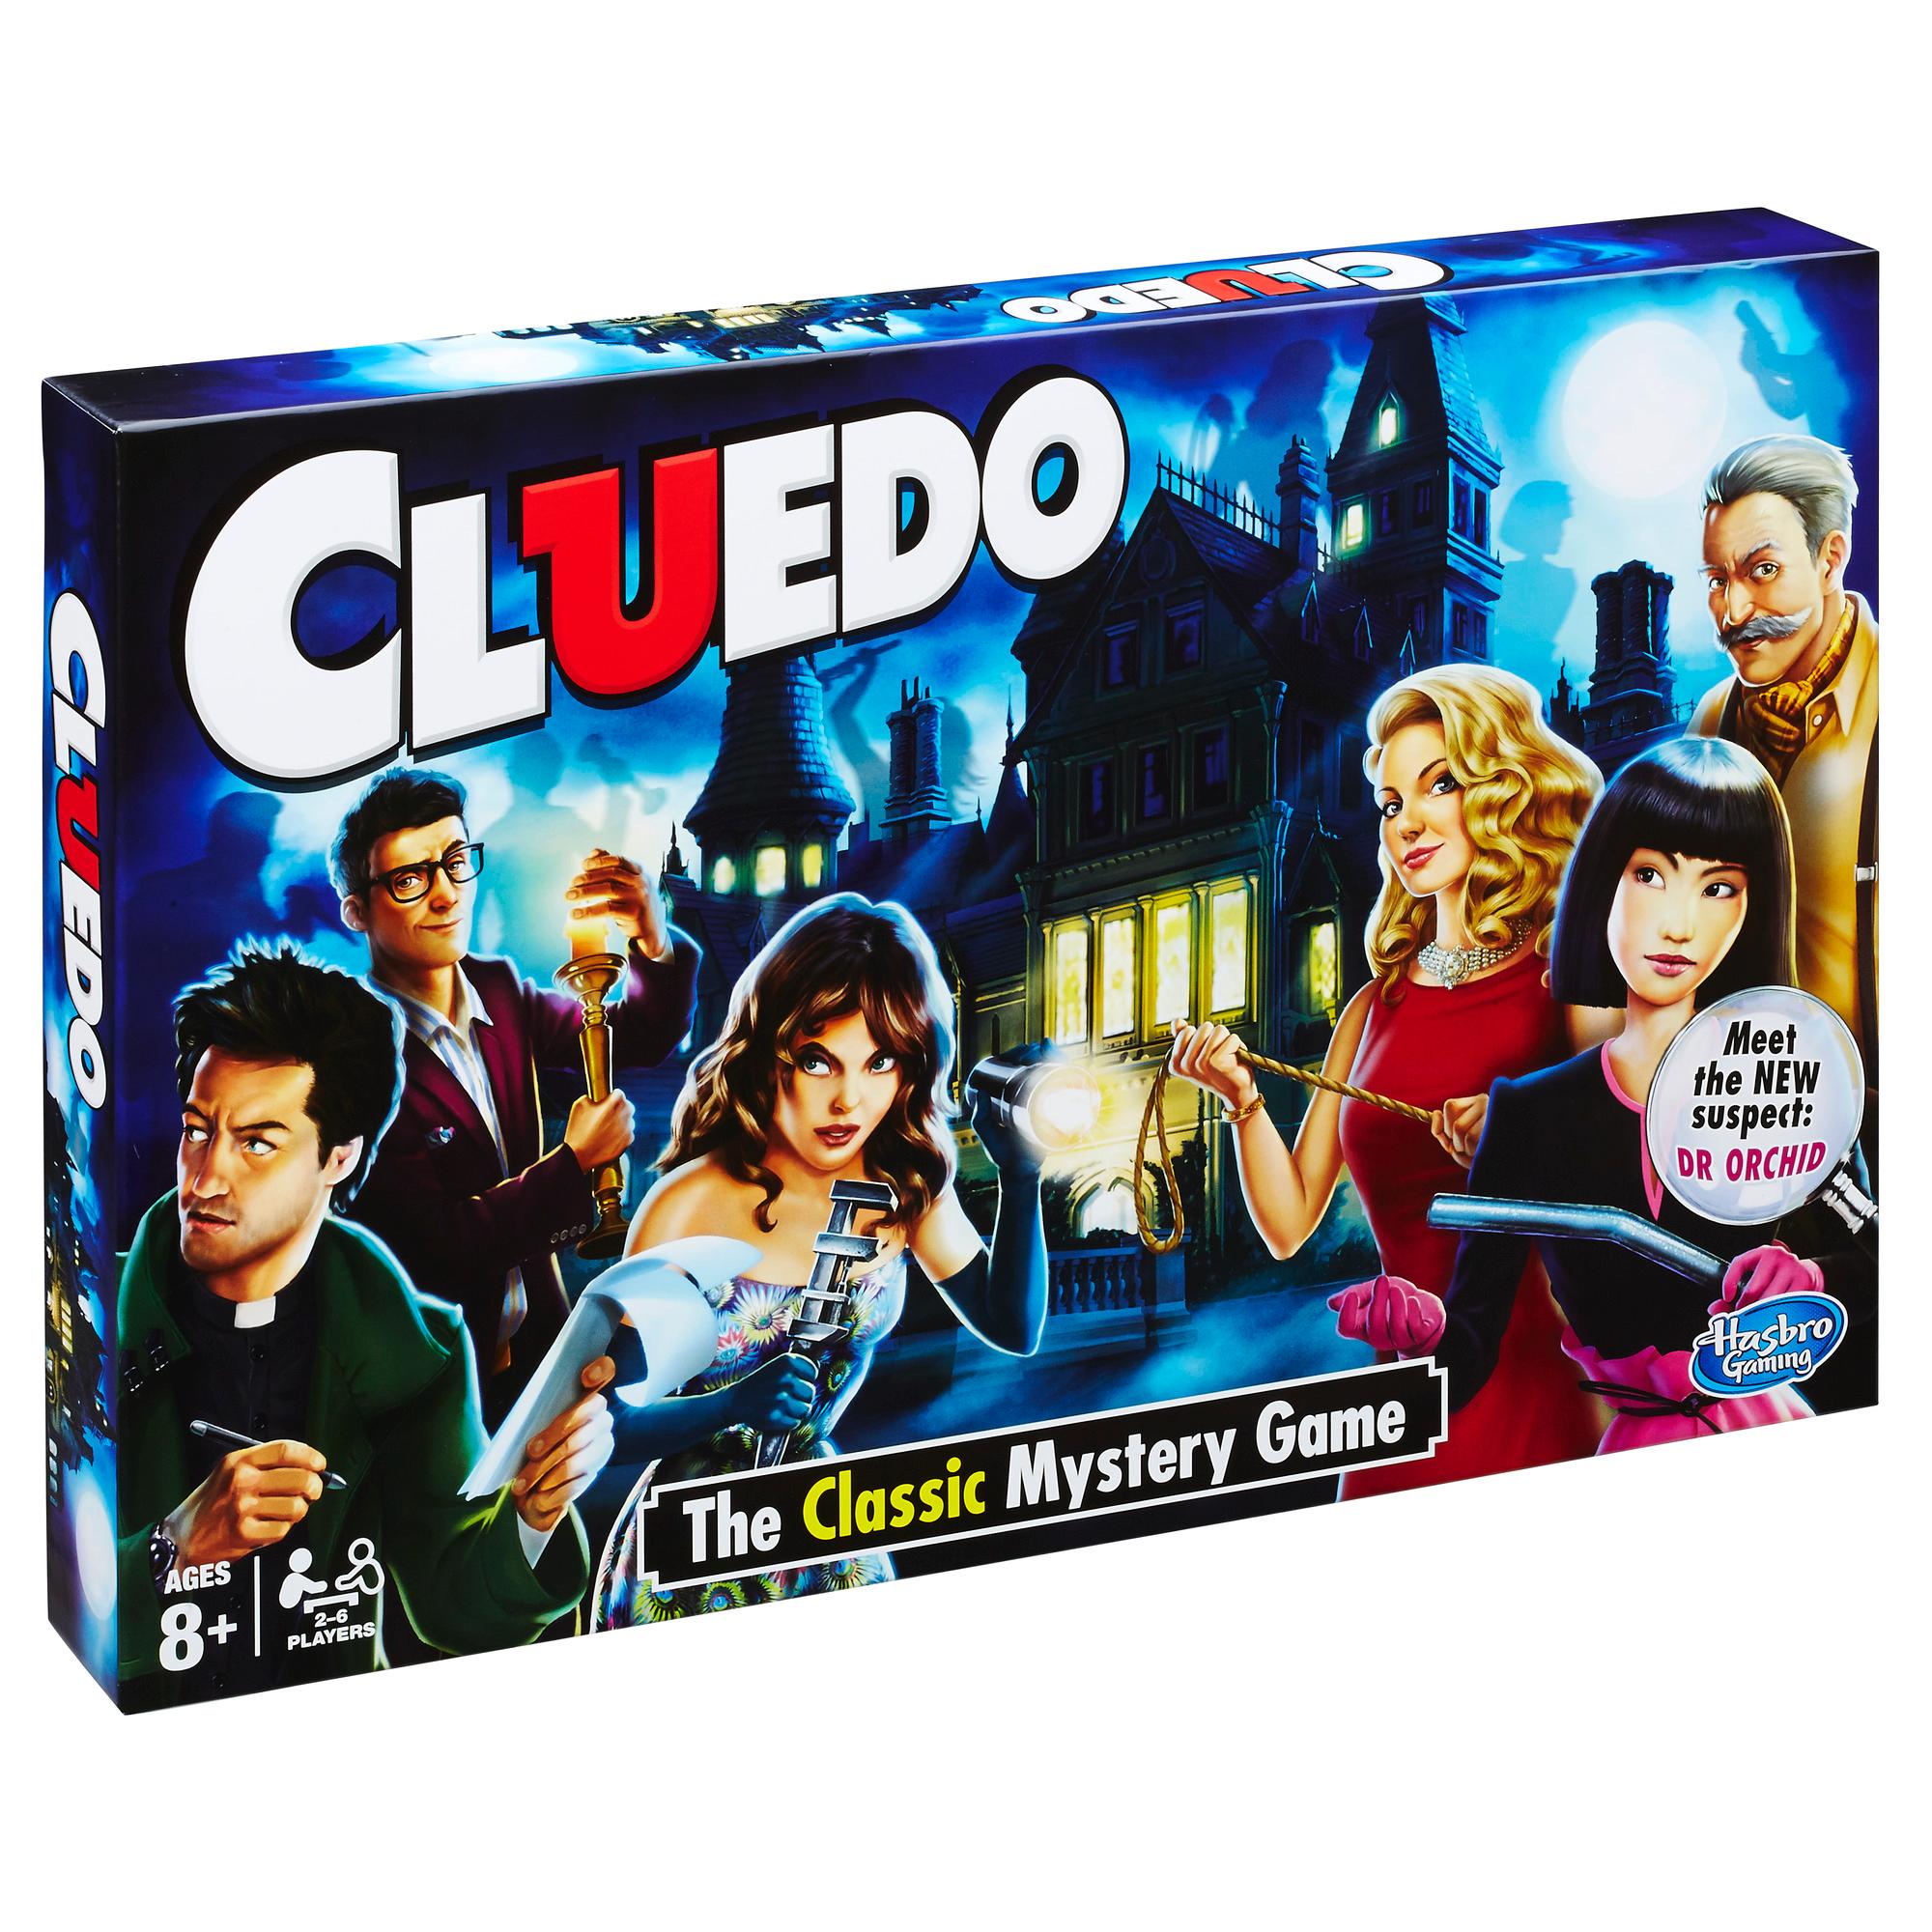 How long is Clue/Cluedo: The Classic Mystery Game?